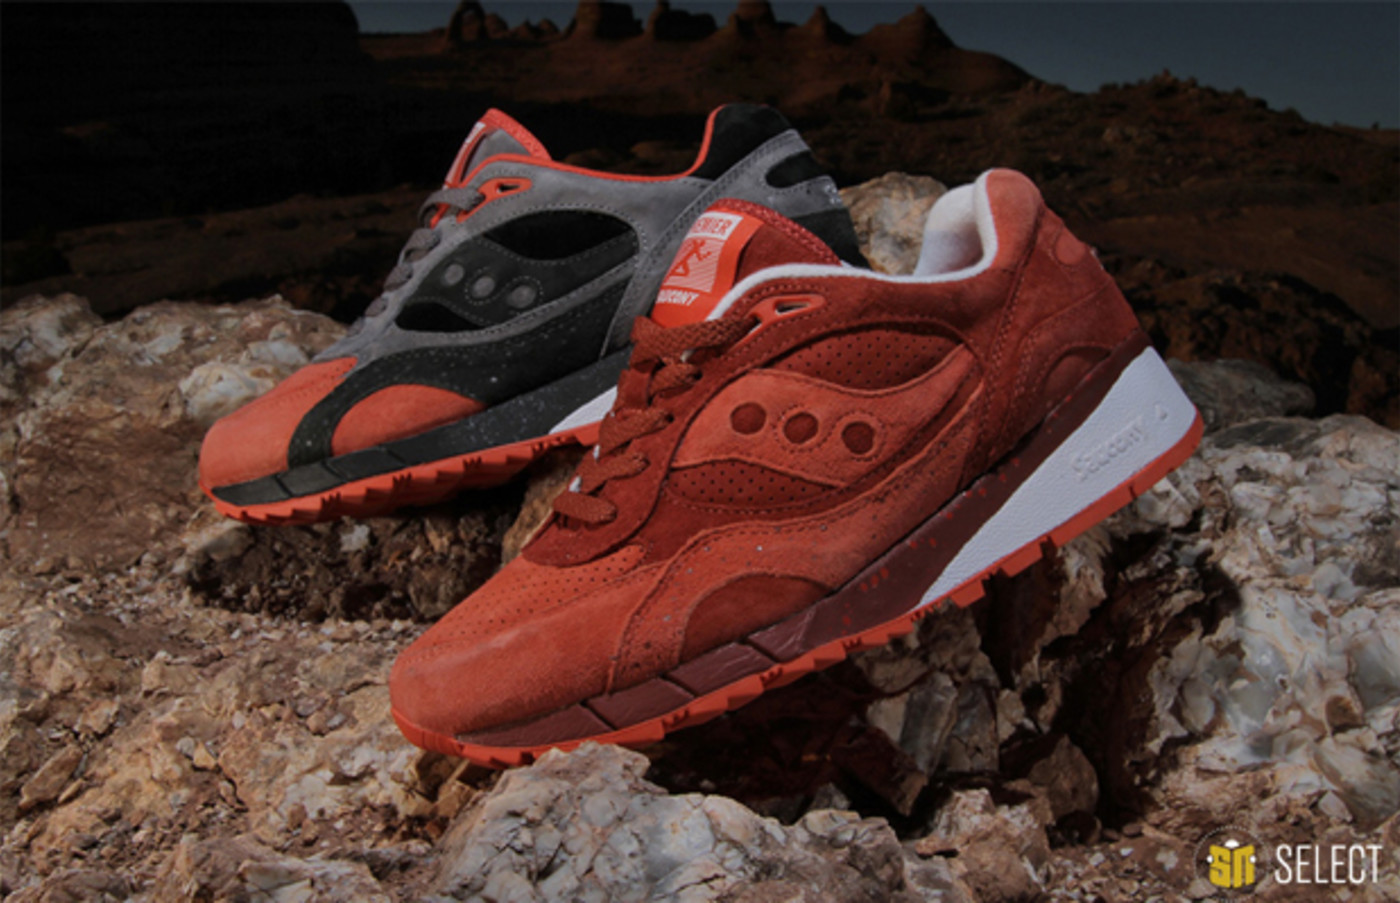 Sneaker News Explores Life on Mars With 